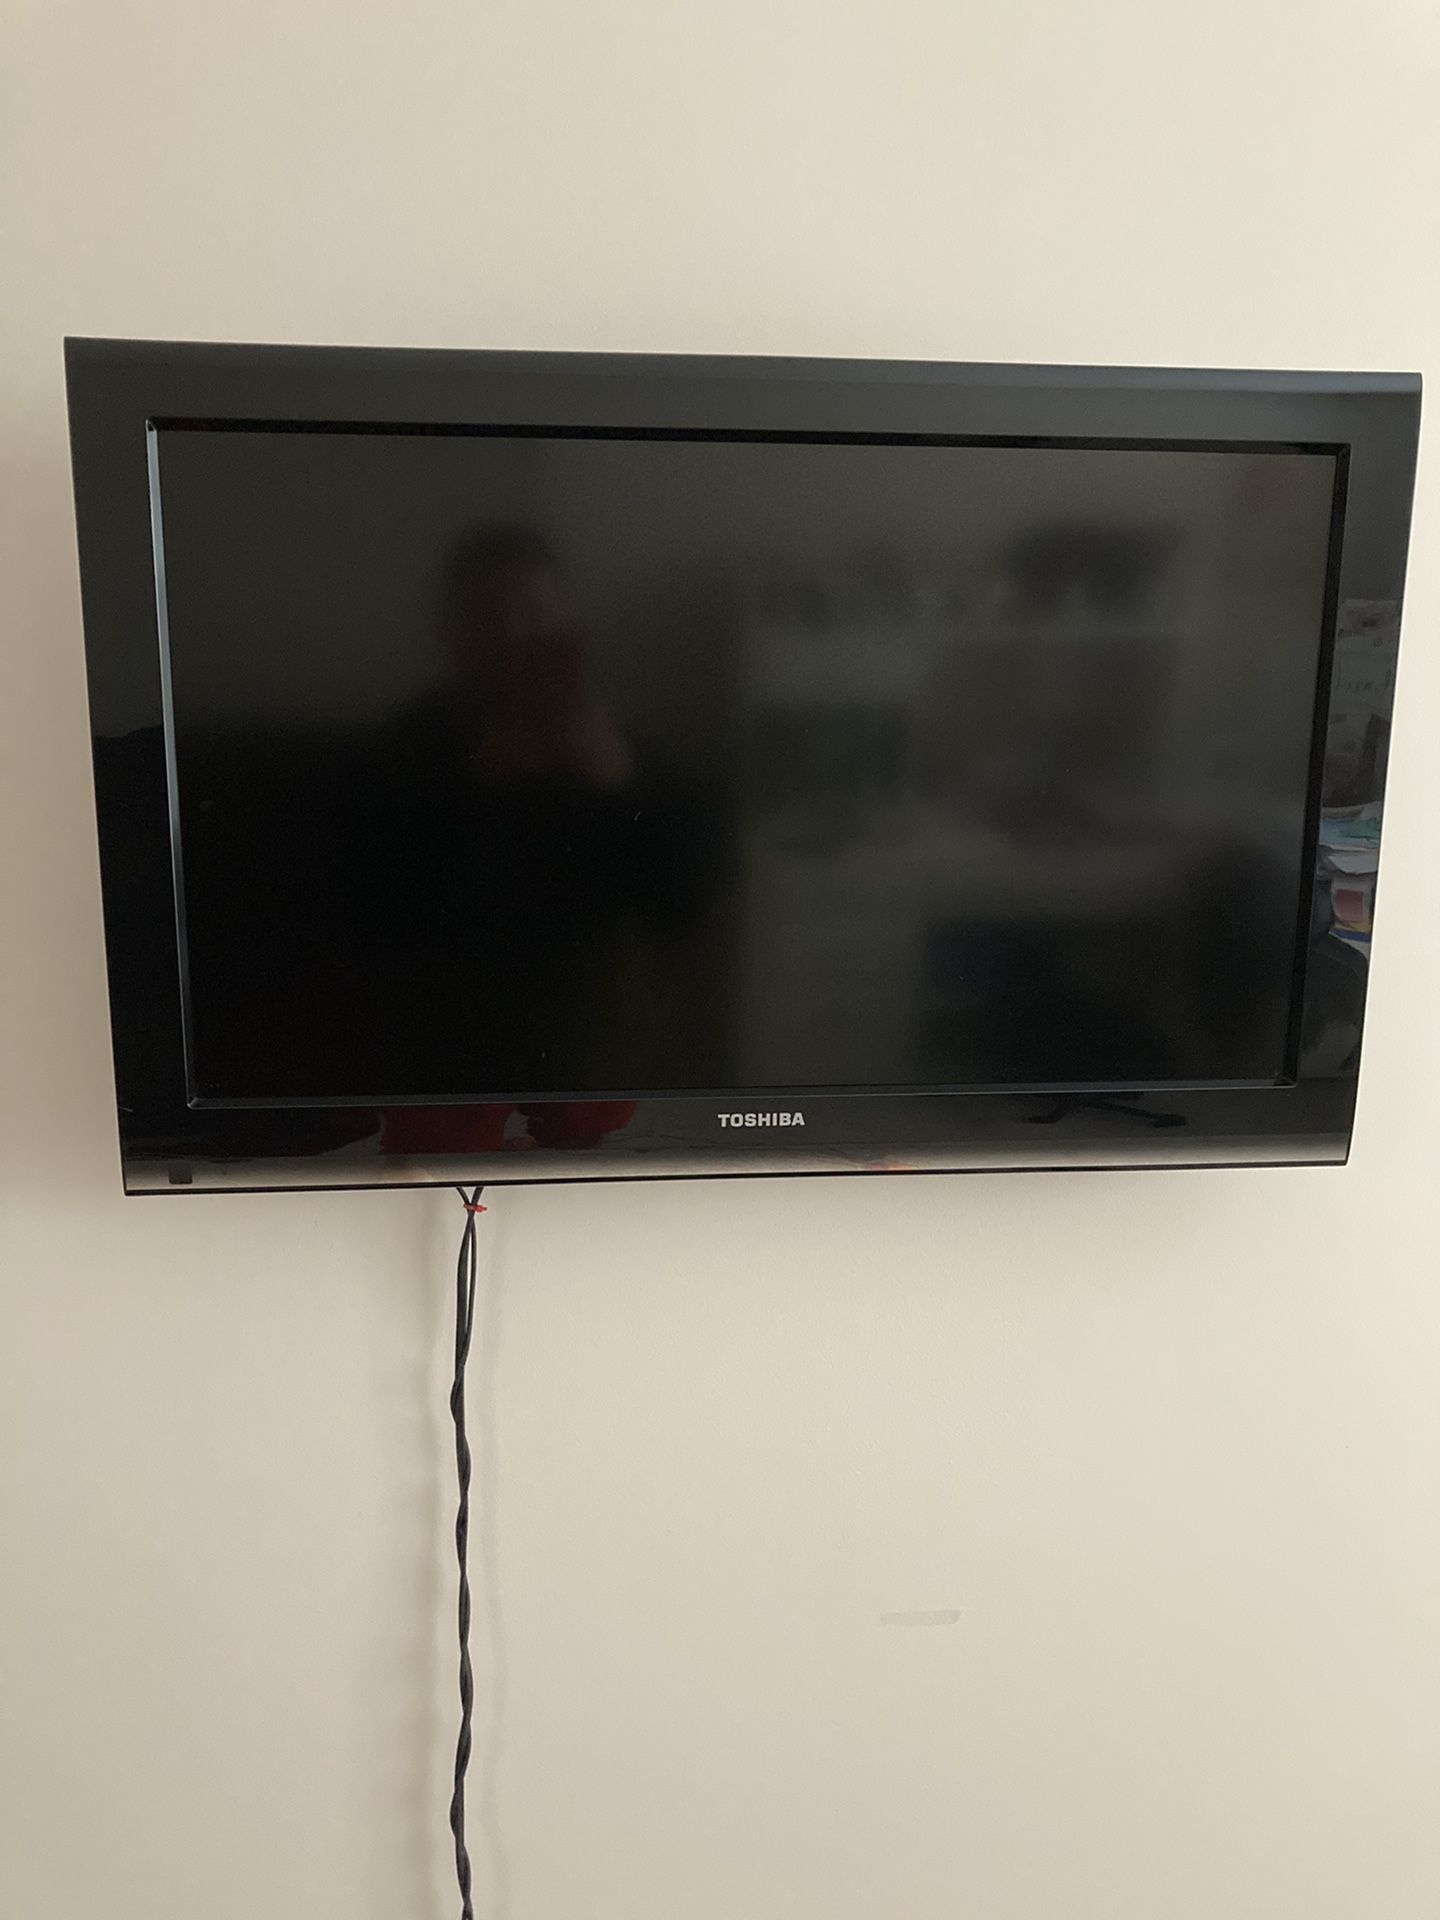 Toshiba 36” Flat Screen with Fire Stick 